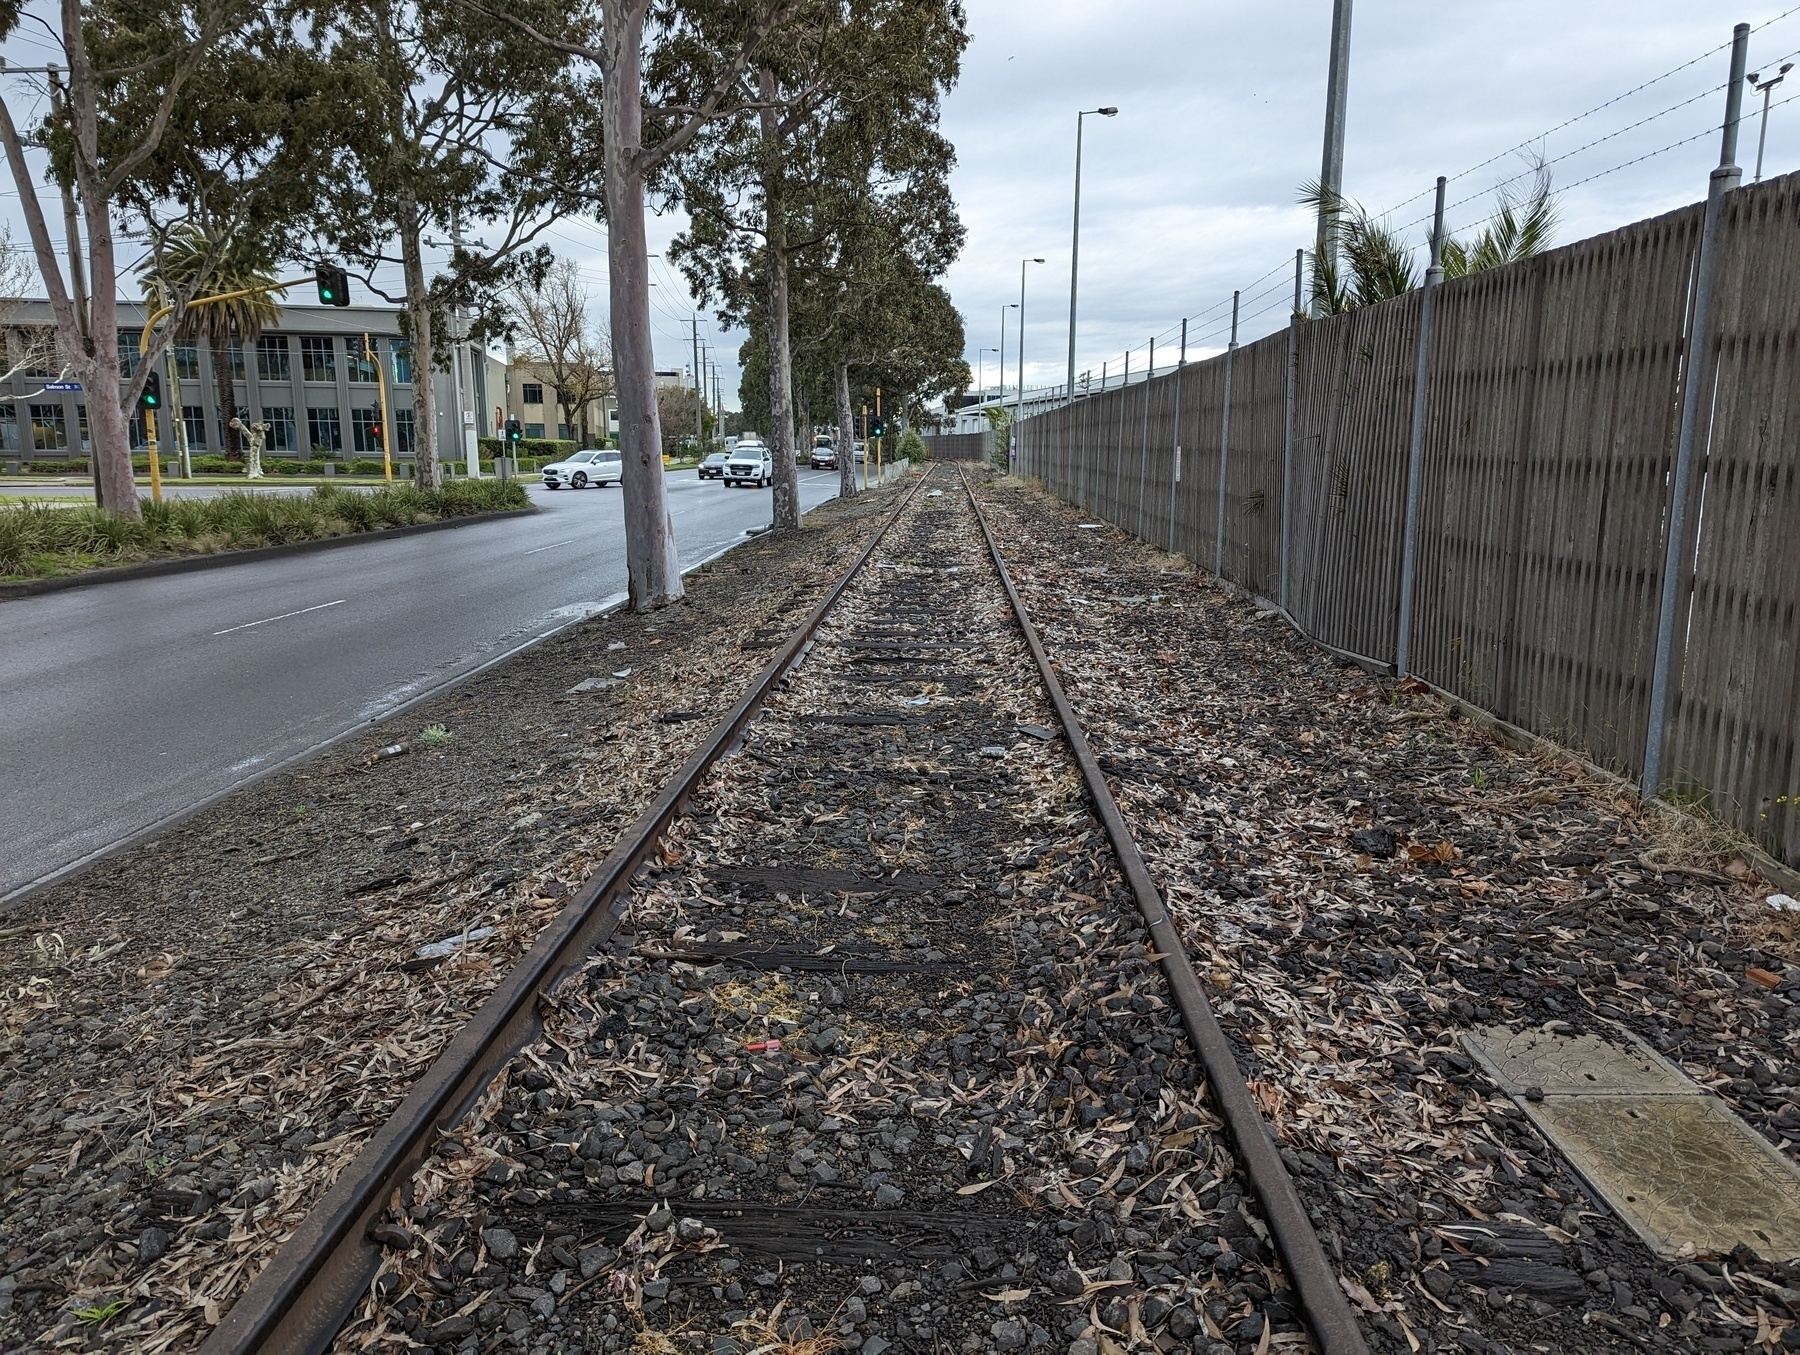 Railway tracks with a road on the left and the Melbourne Port fence on the right.